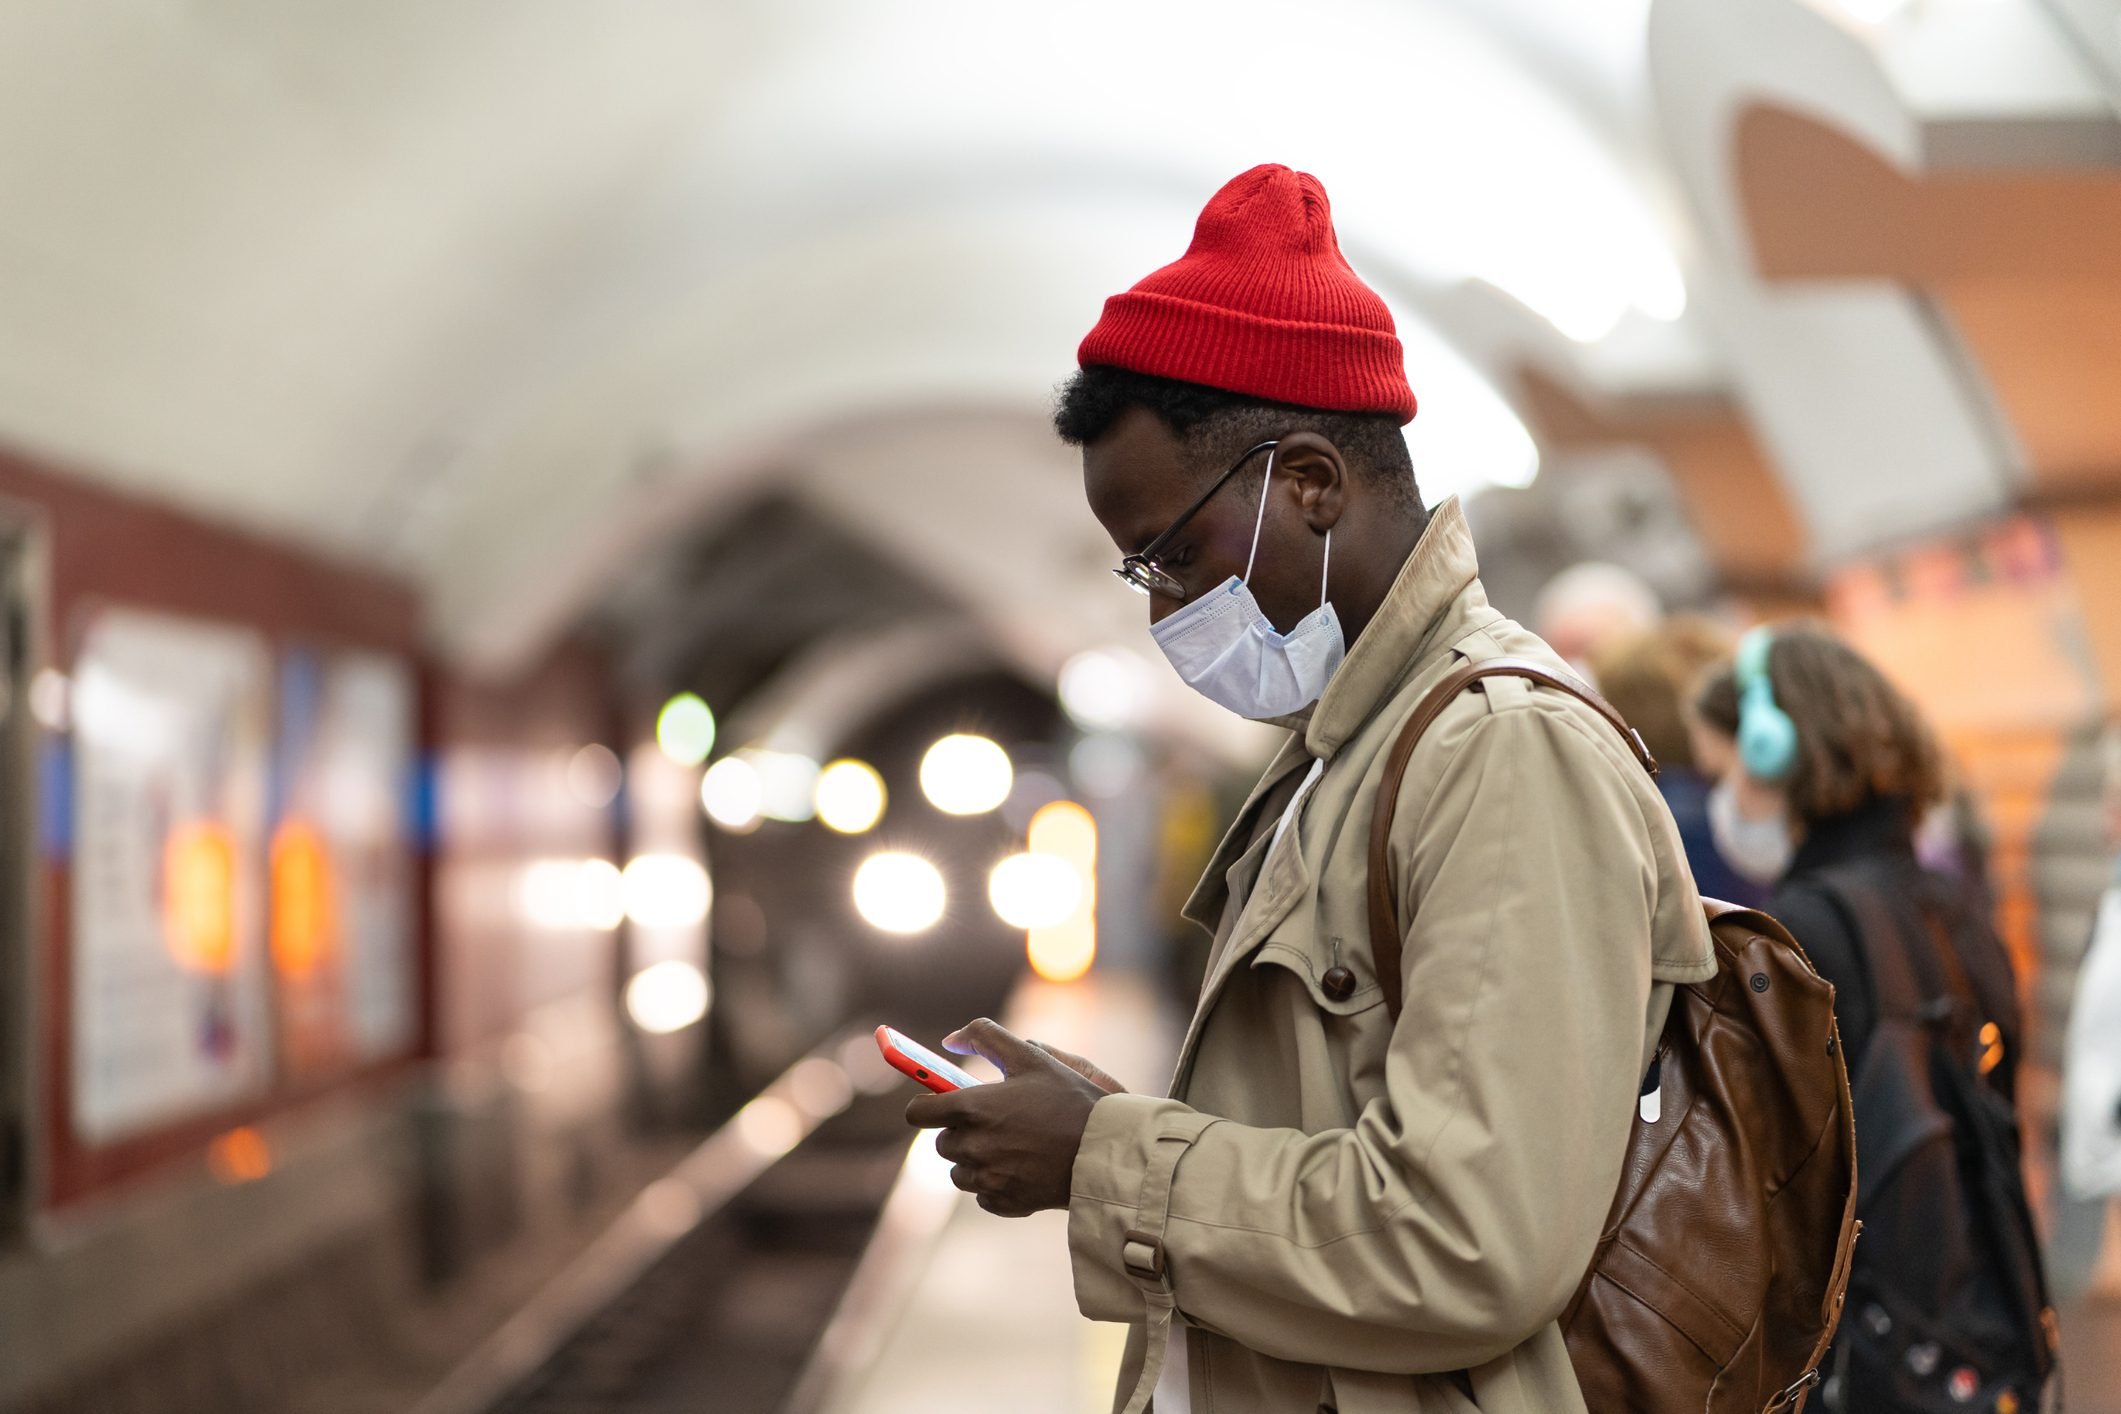 Here’s What Virology Experts Think About Dropped Masks on Public Transport as New Variants Spread